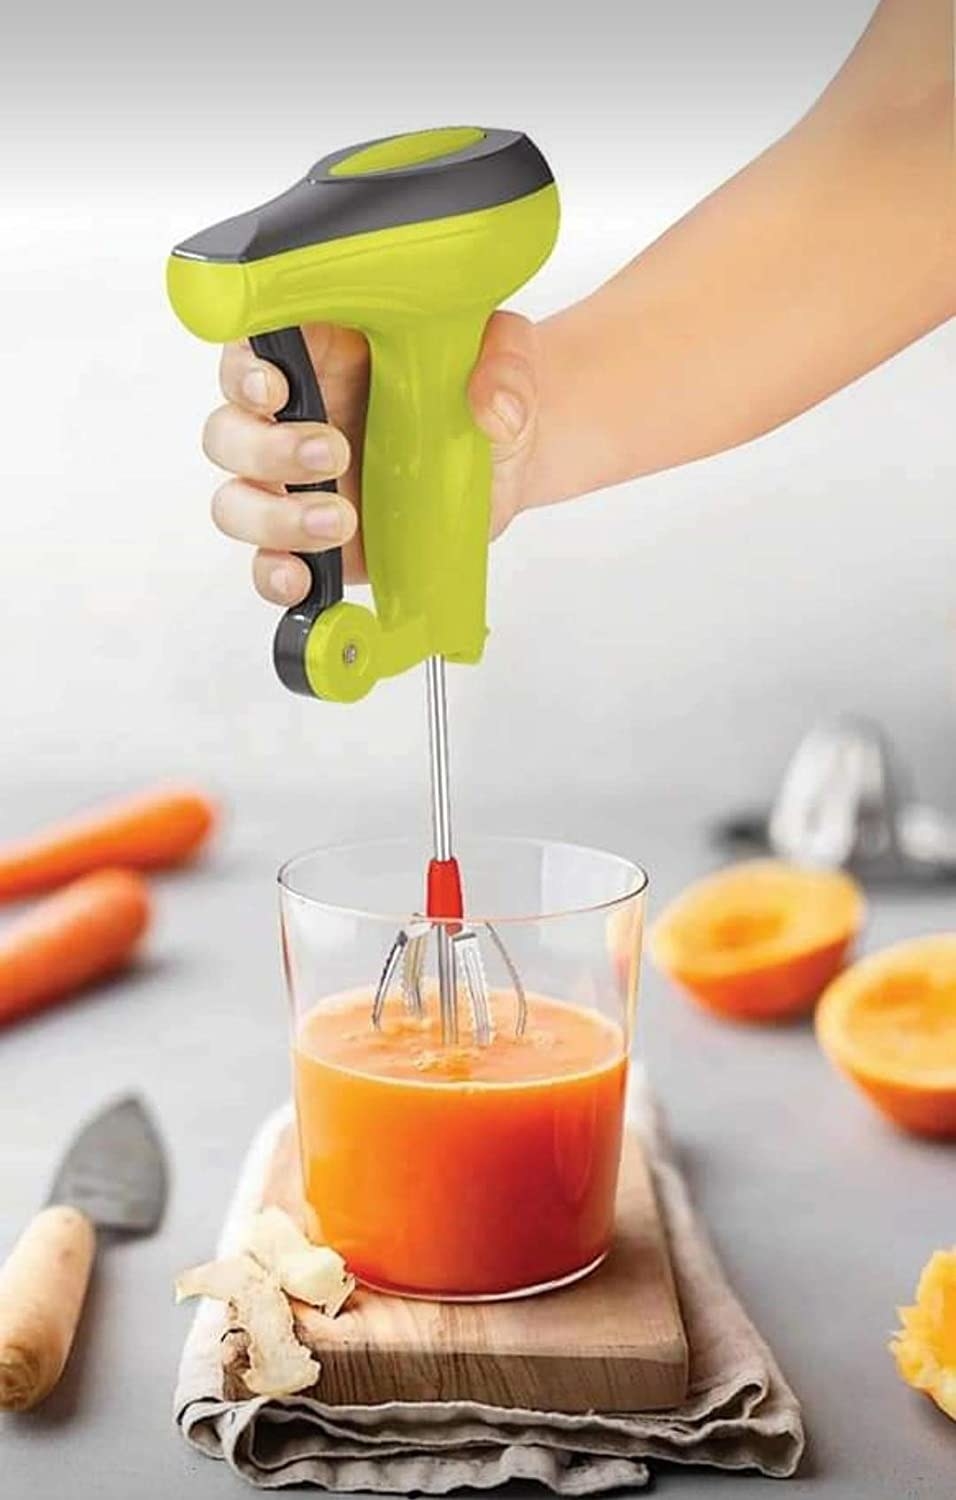 The hand-blender pictured mixing a glass of orange juice.